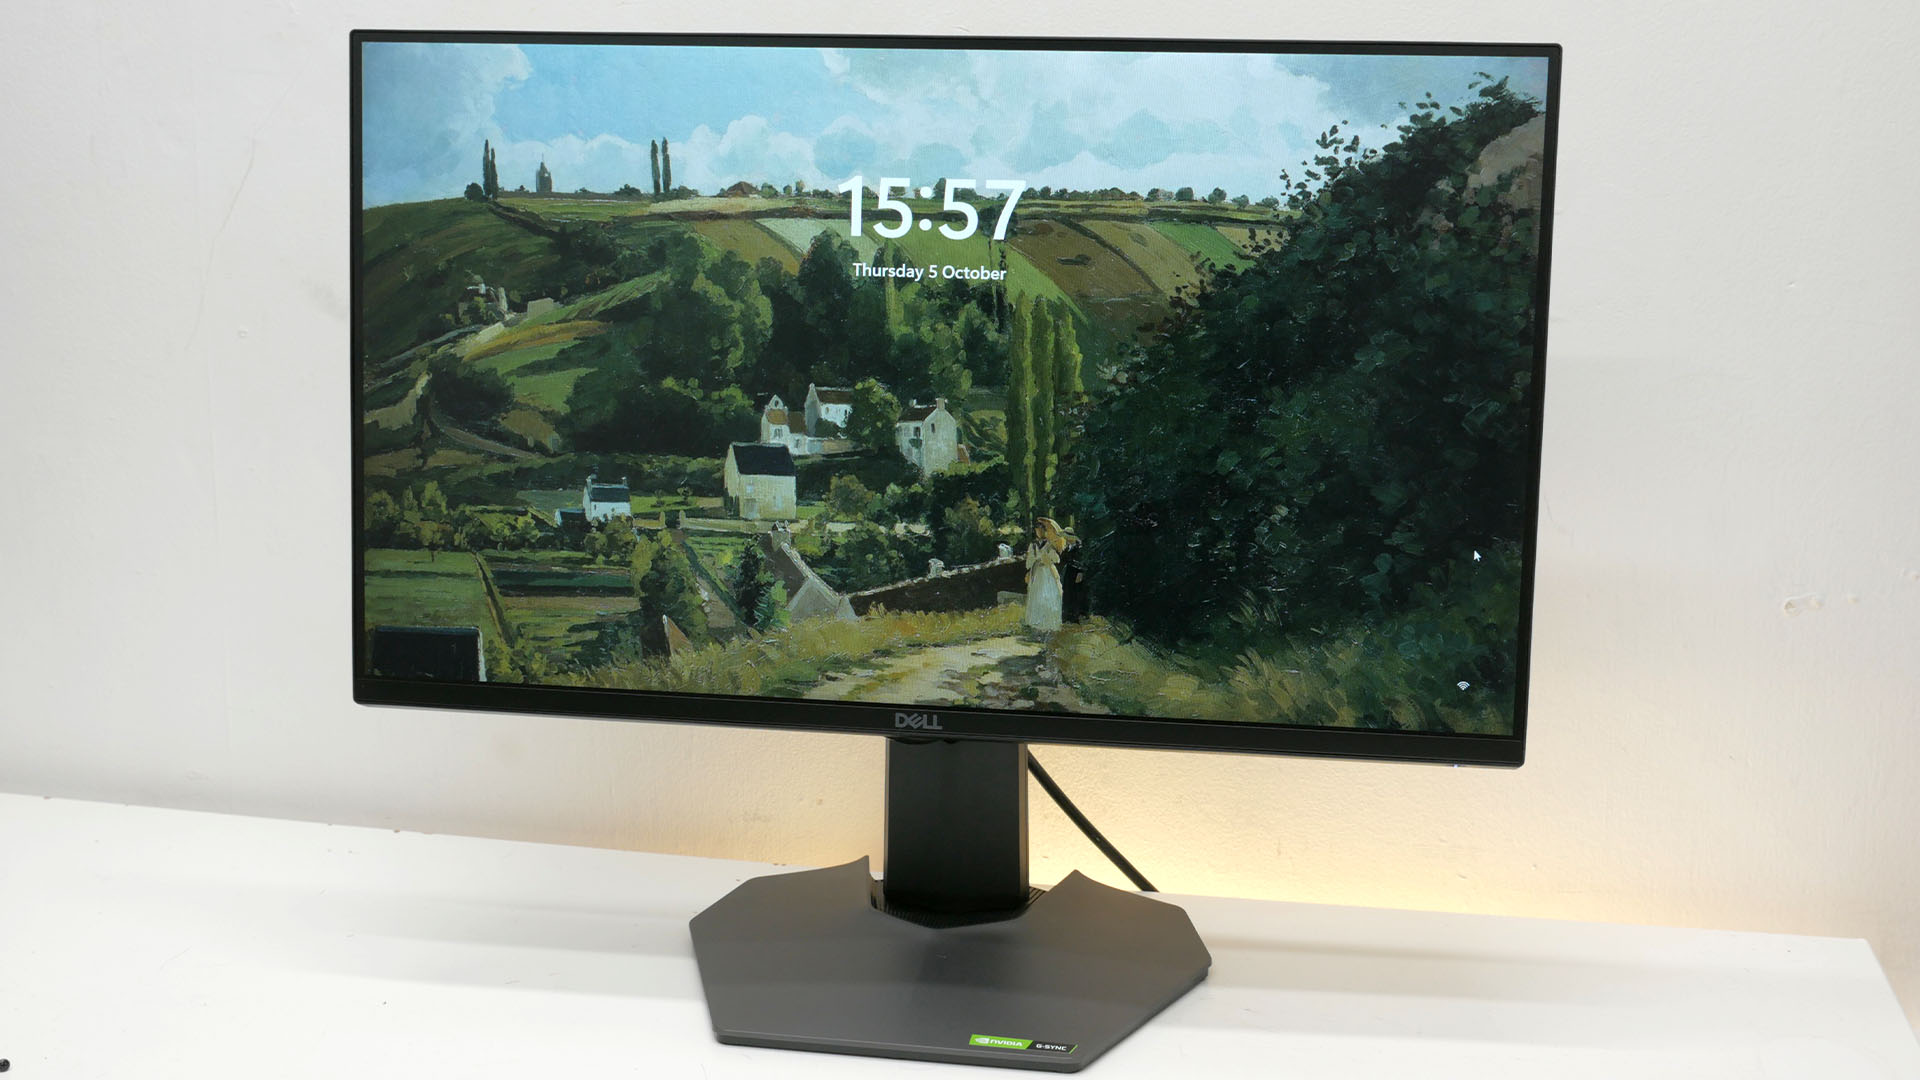 Dell G2524H review image showing the front of the monitor with the screensaver visible behind the time.